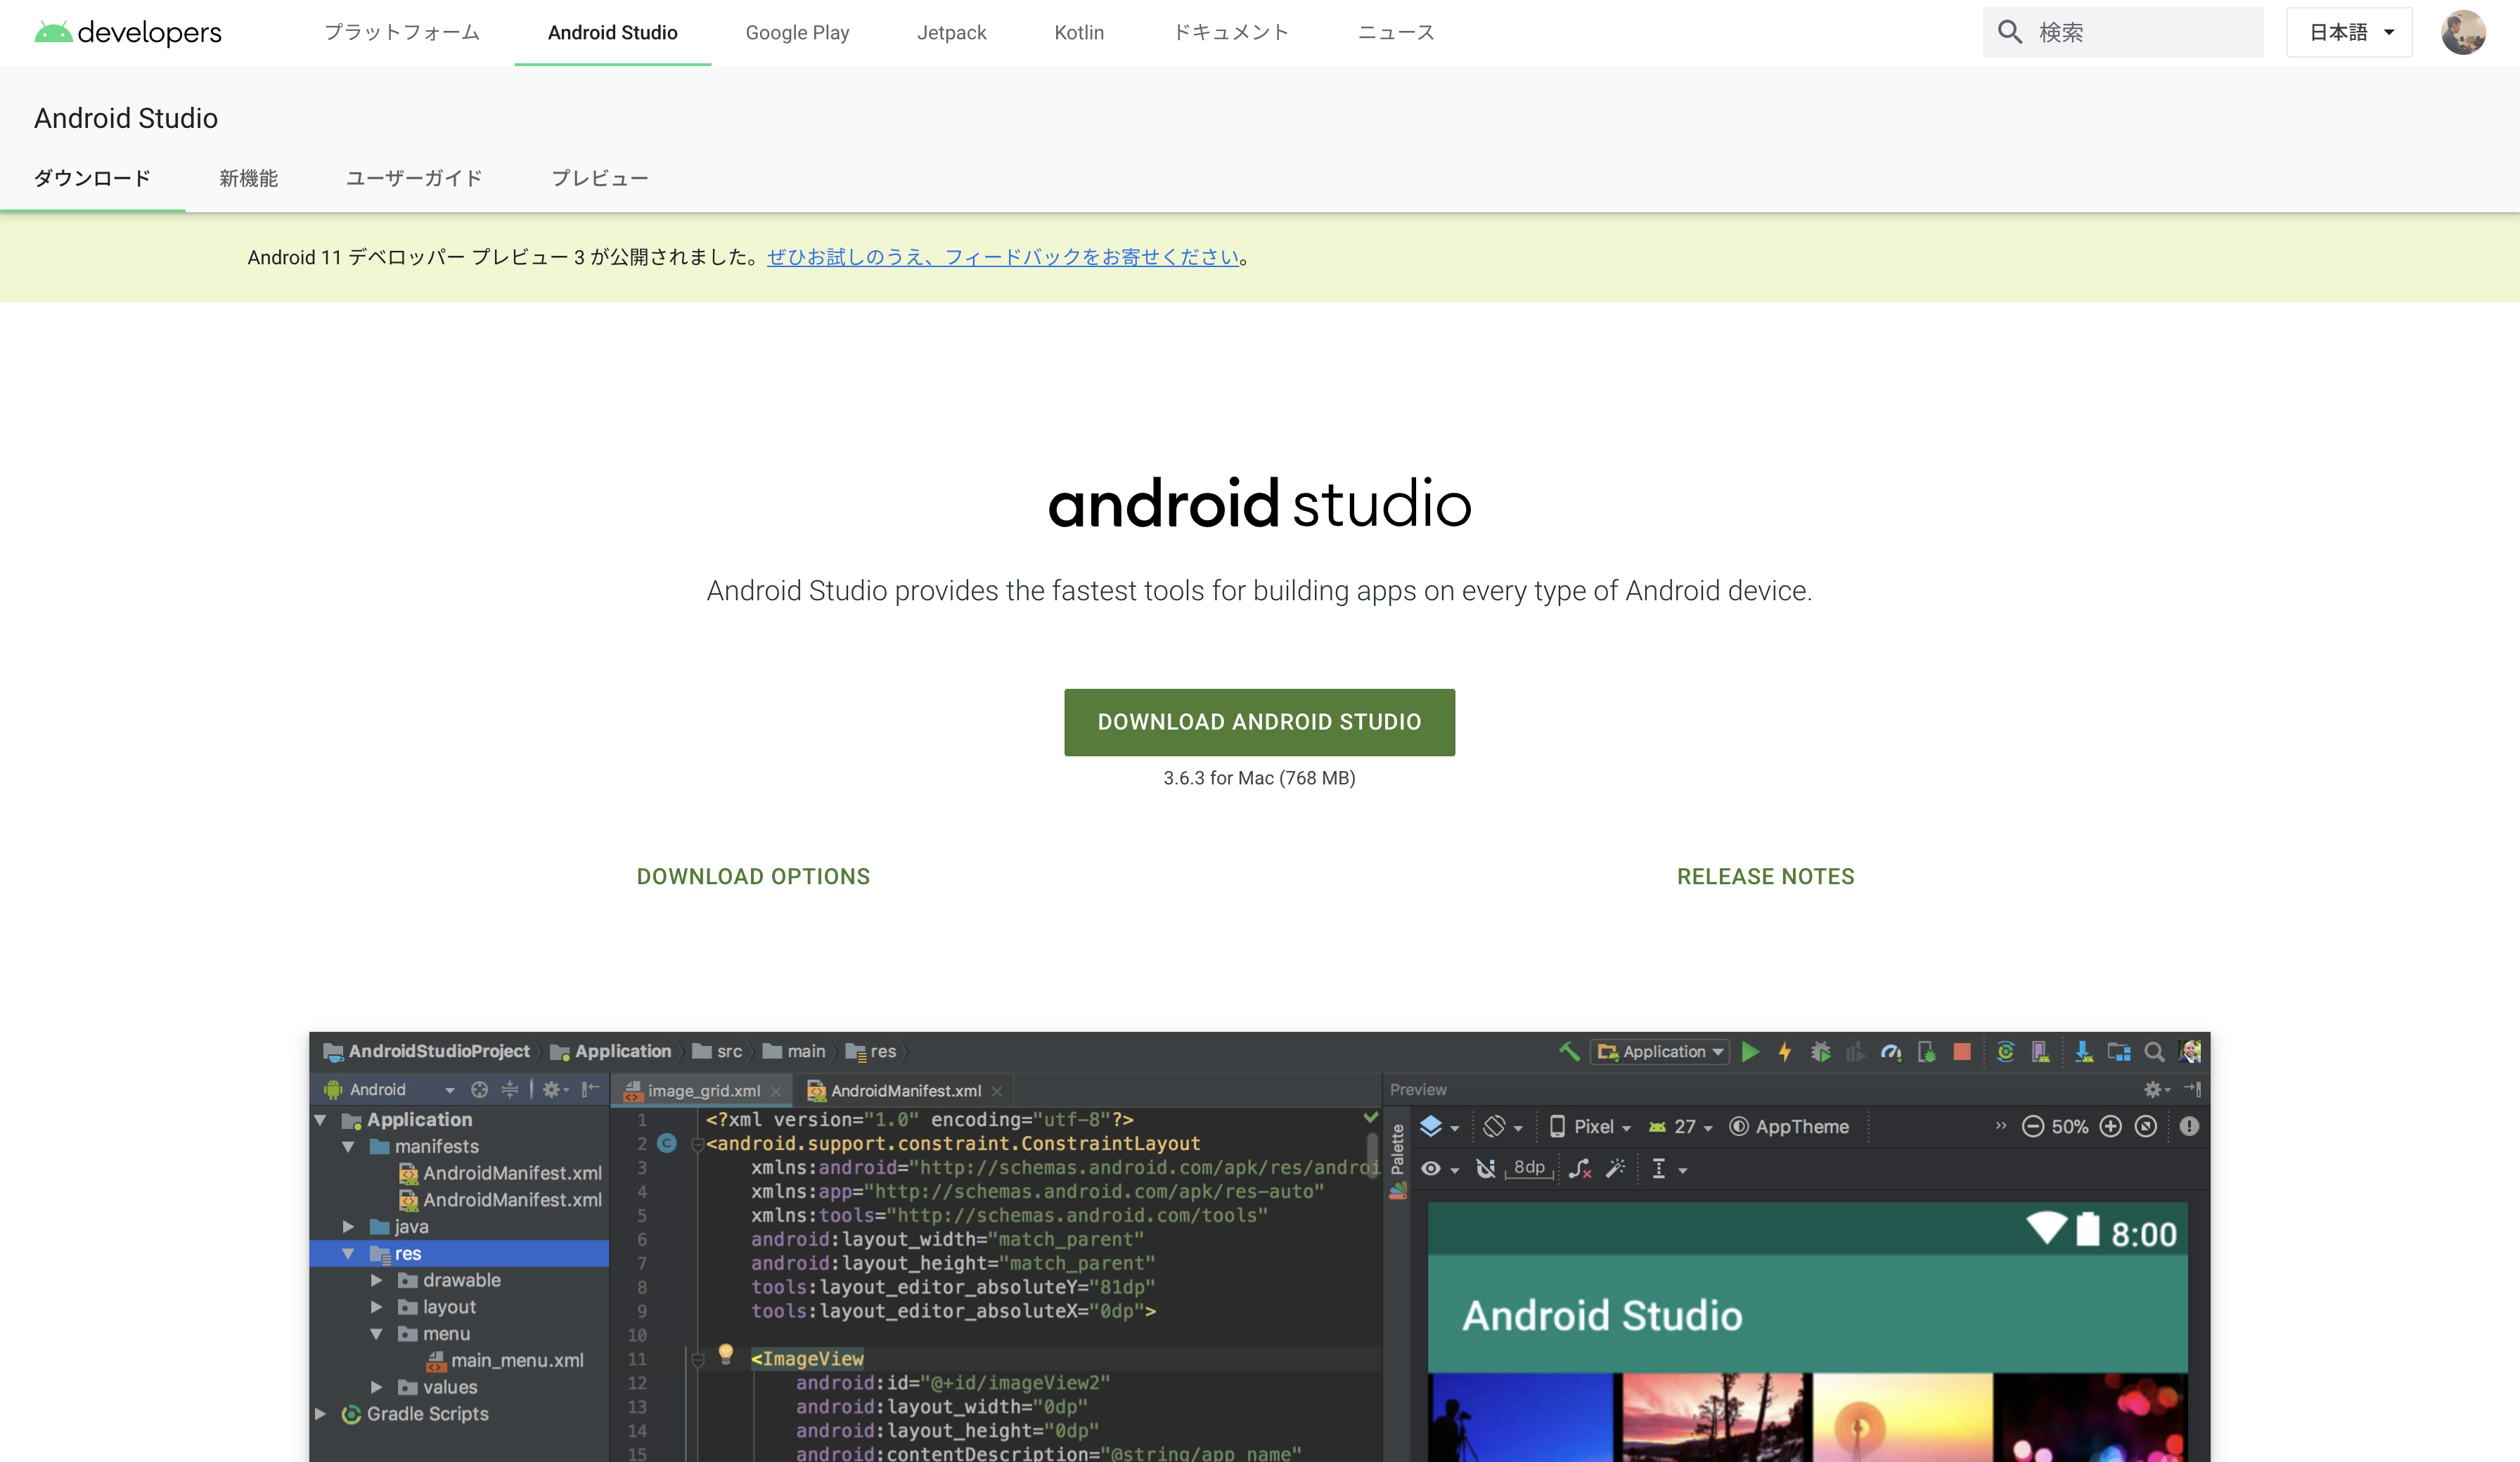 AndroidStudio.png